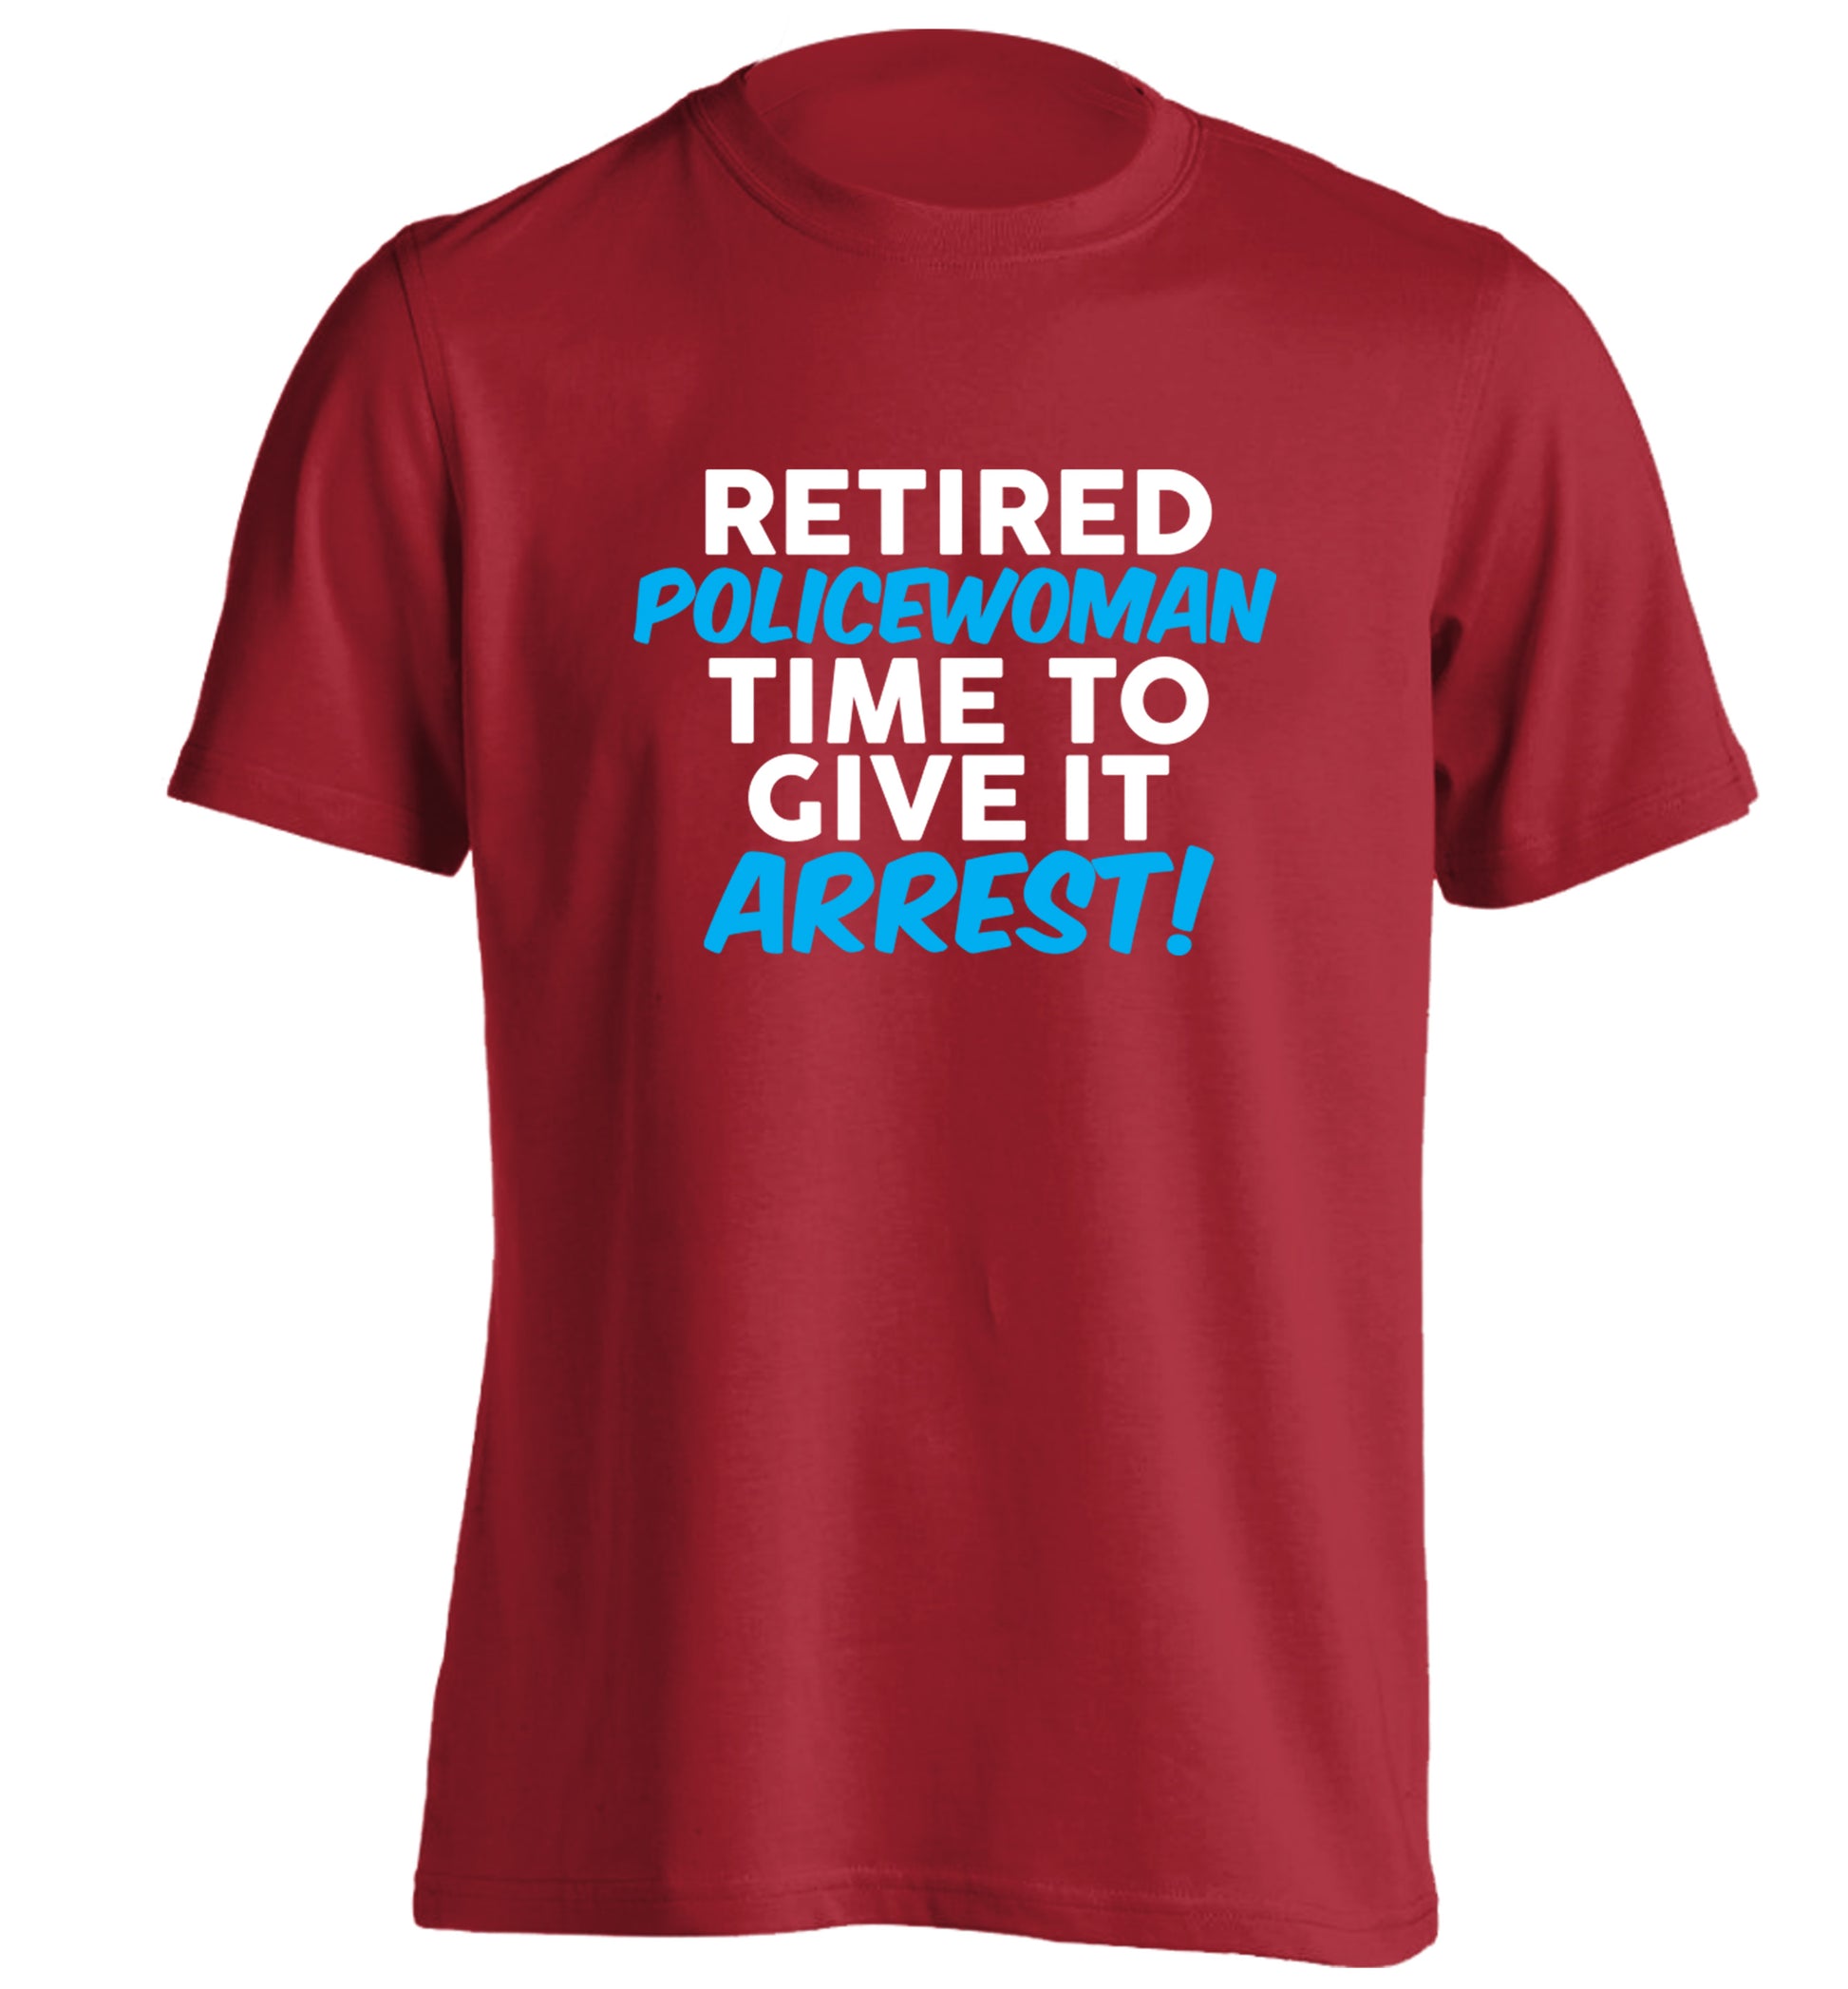 Retired policewoman time to give it arrest adults unisex red Tshirt 2XL